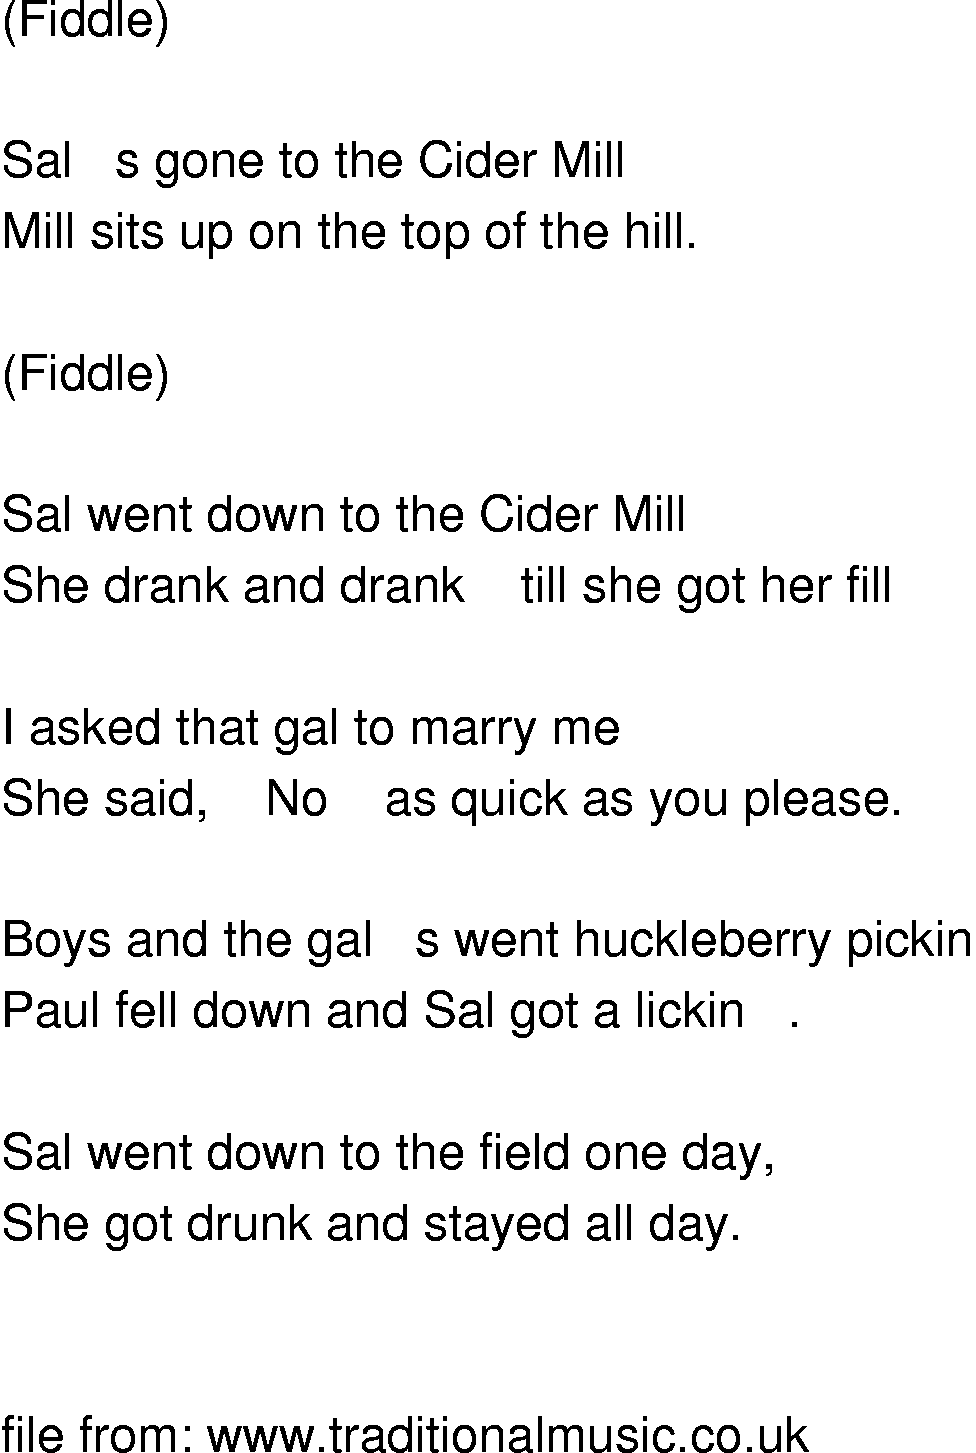 Old-Time (oldtimey) Song Lyrics - sal went down to cider mill